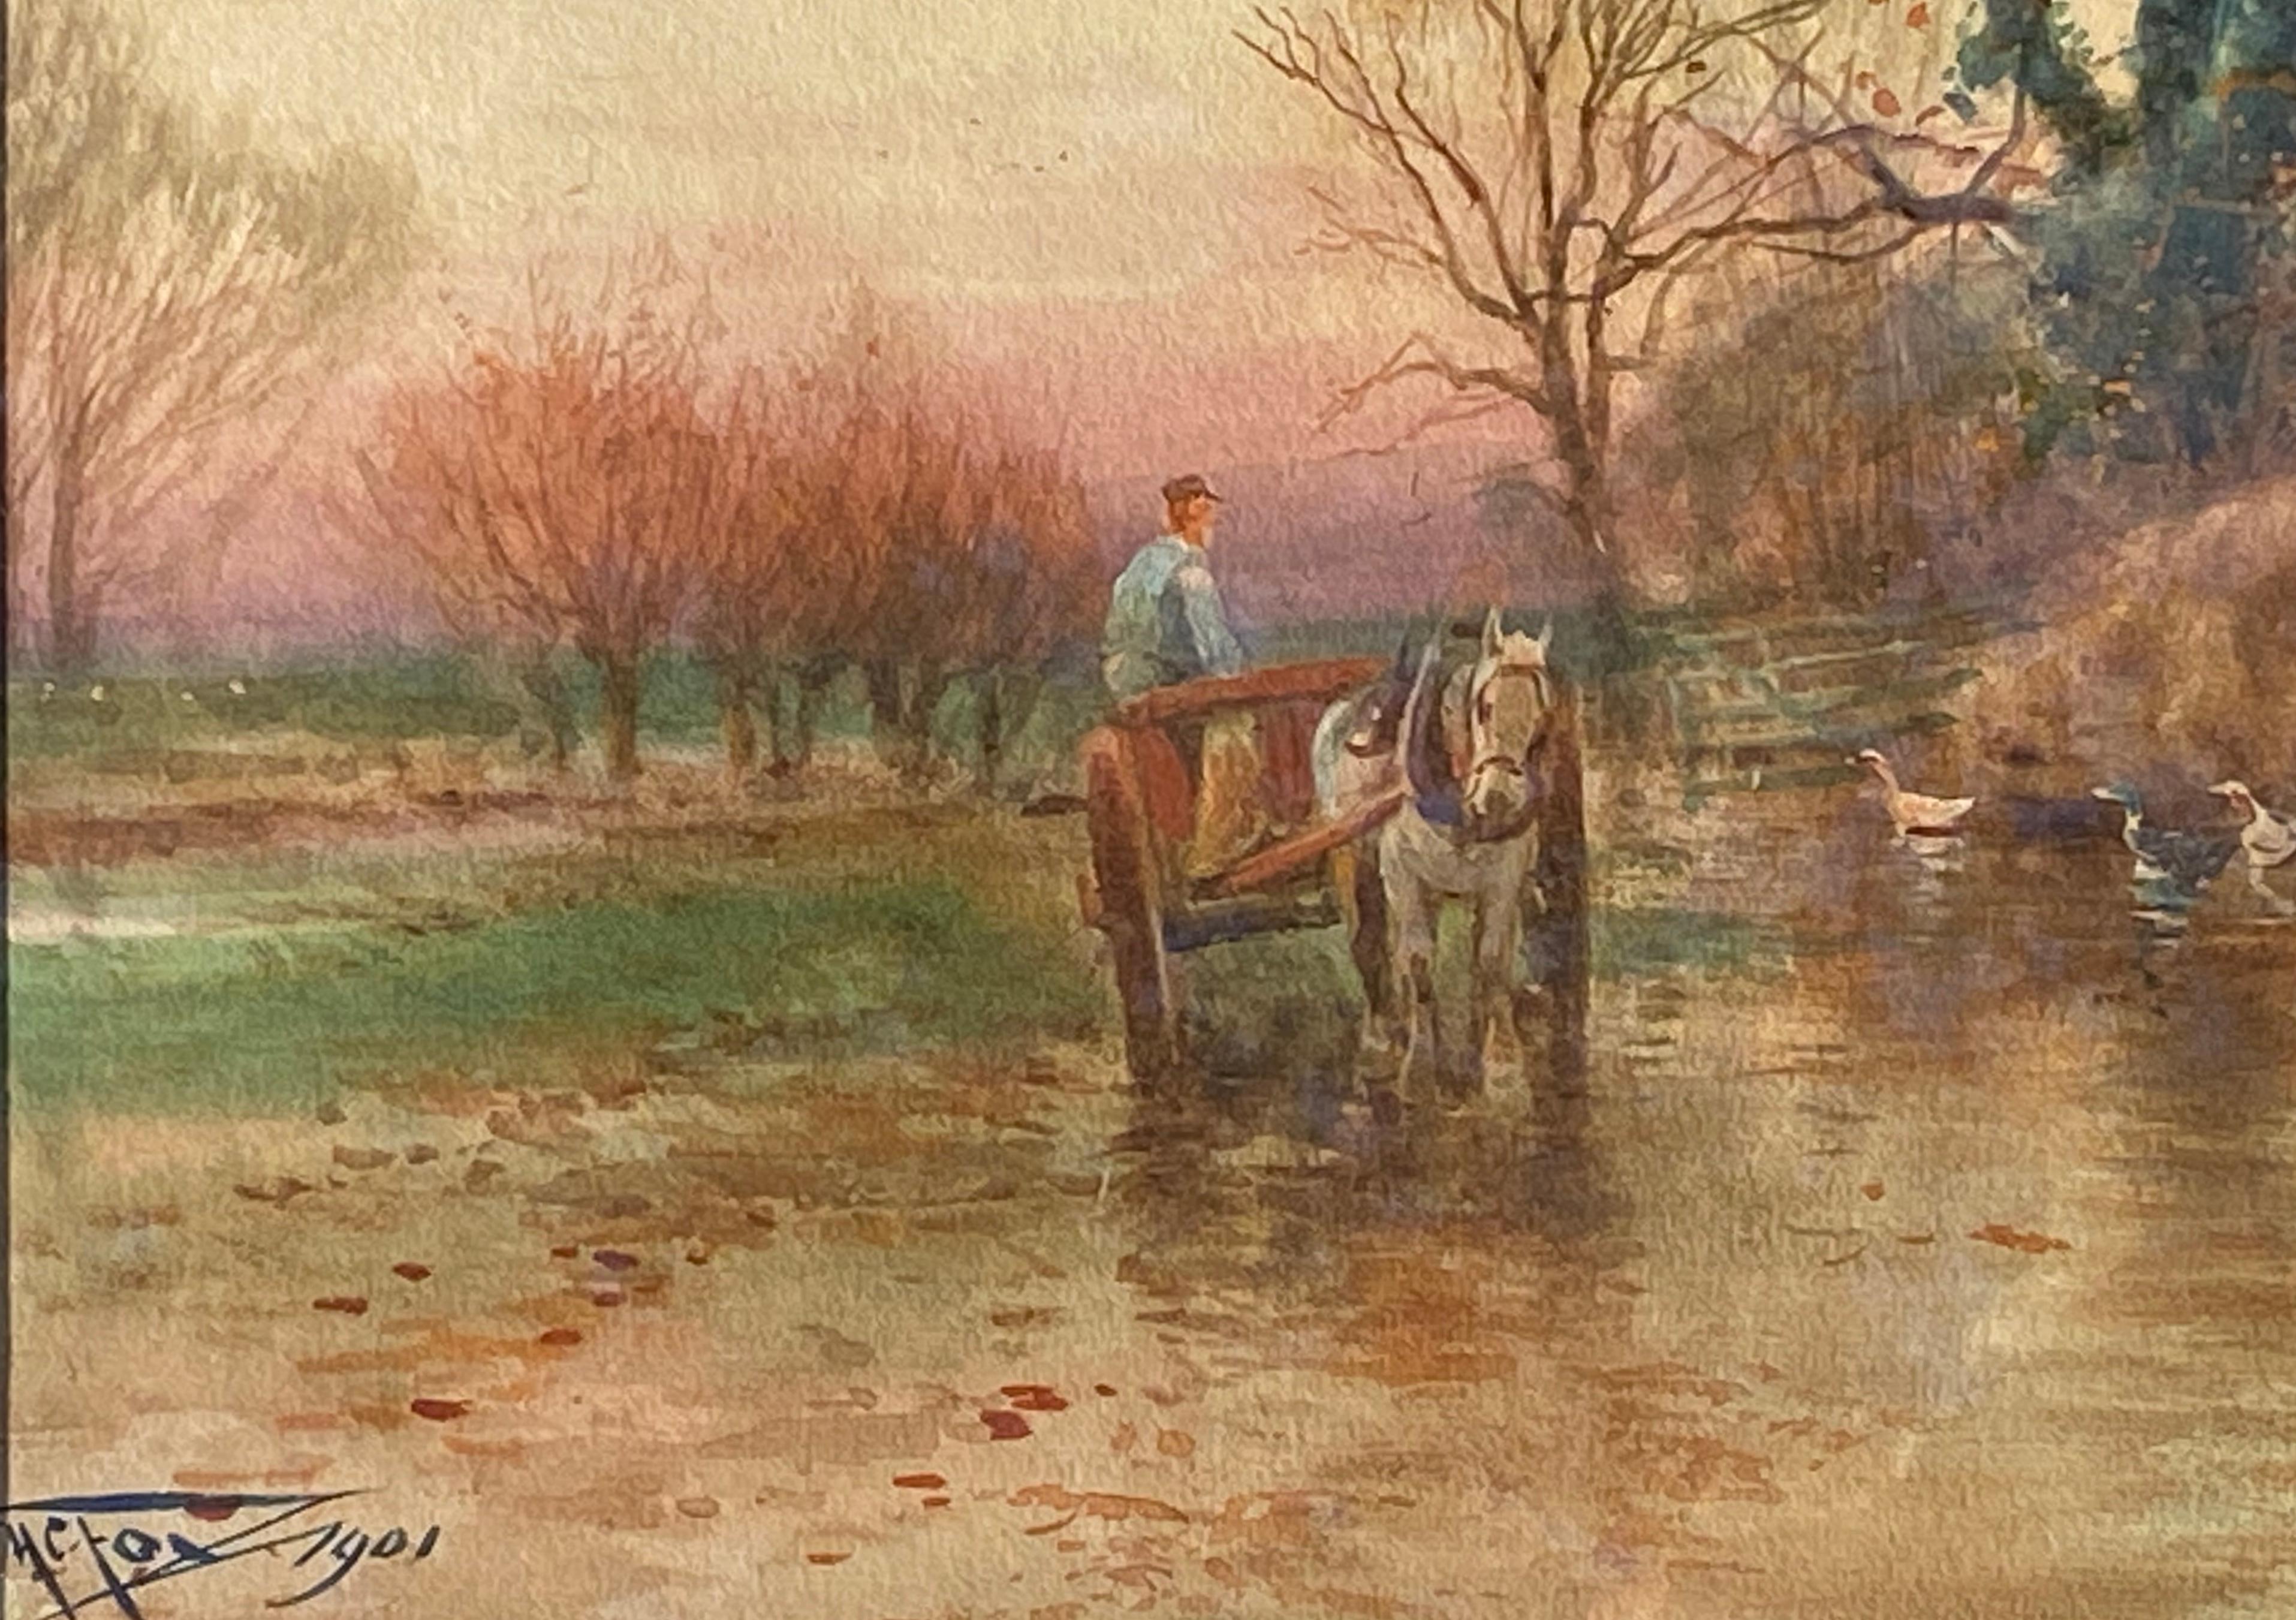 “End of the Day” - Post-Impressionist Art by Henry Charles Fox